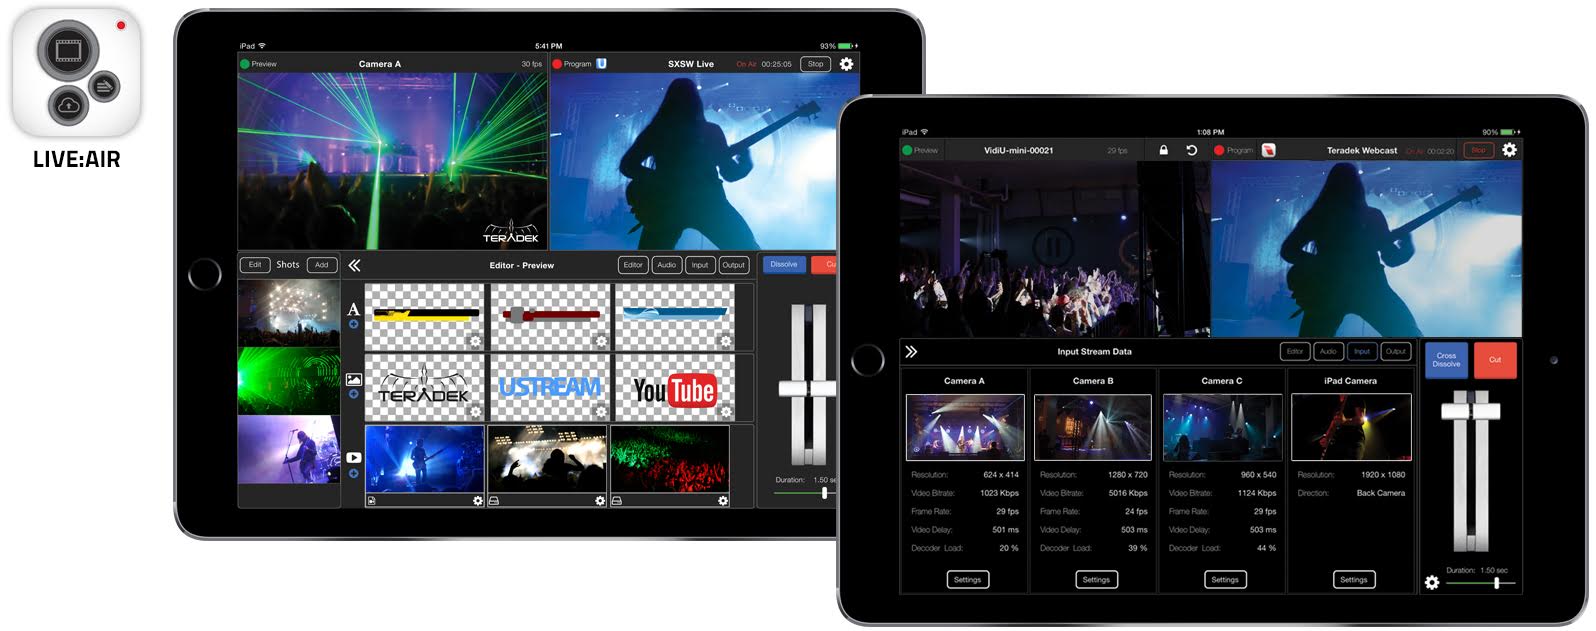 Professional Live Video Broadcasting Production On Your Tablet or Phone Live Air 1